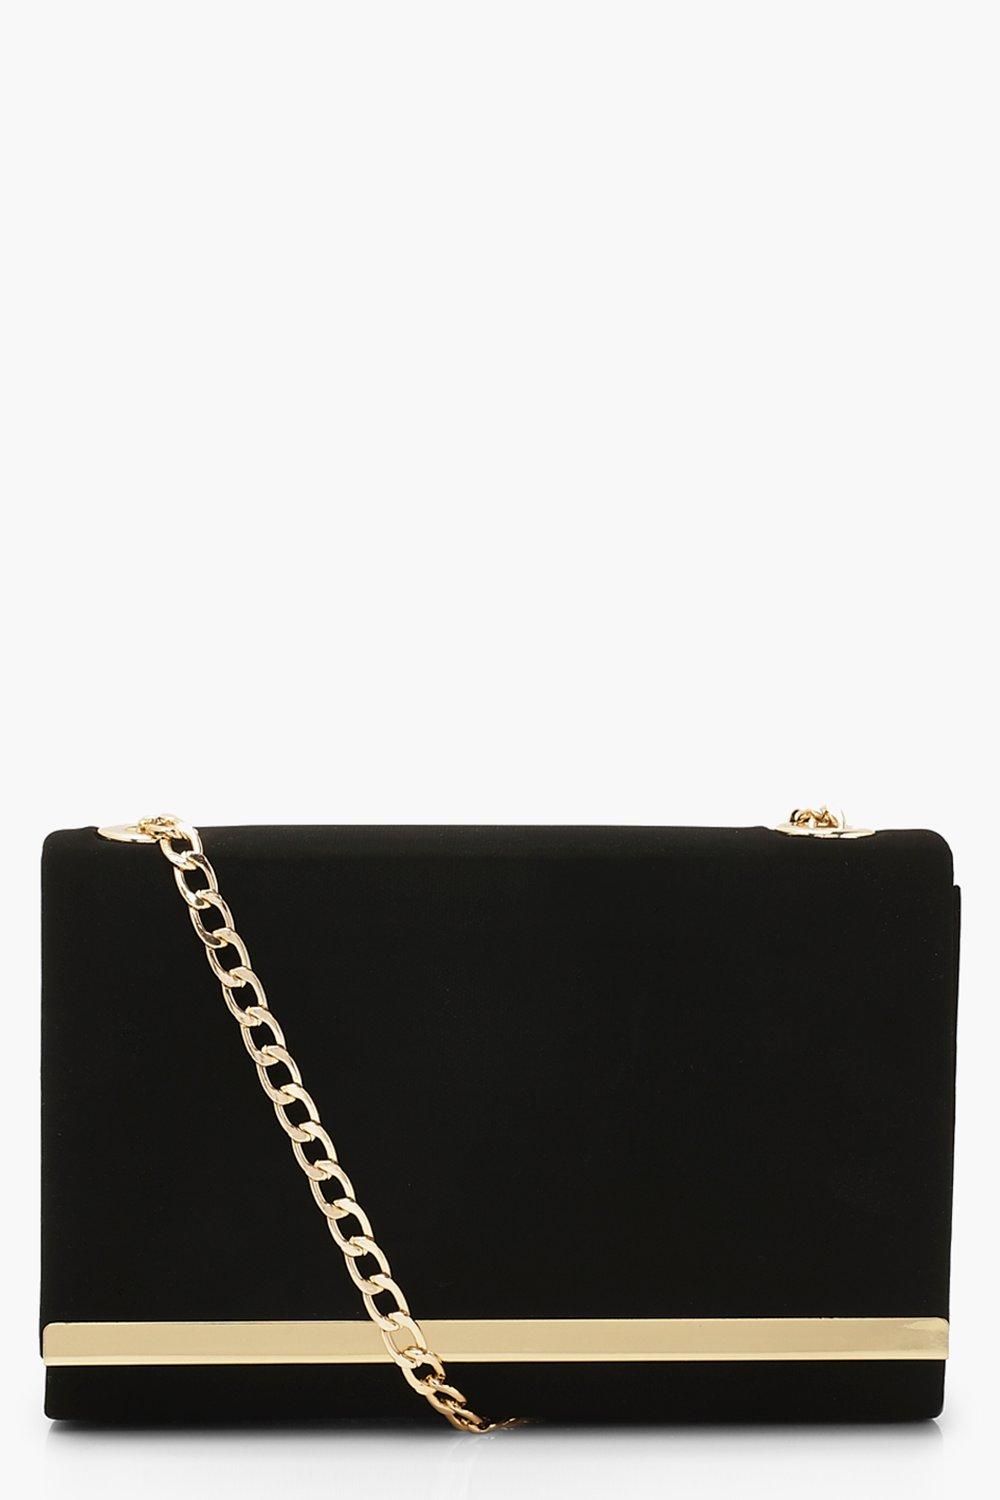 black clutch bag with chain